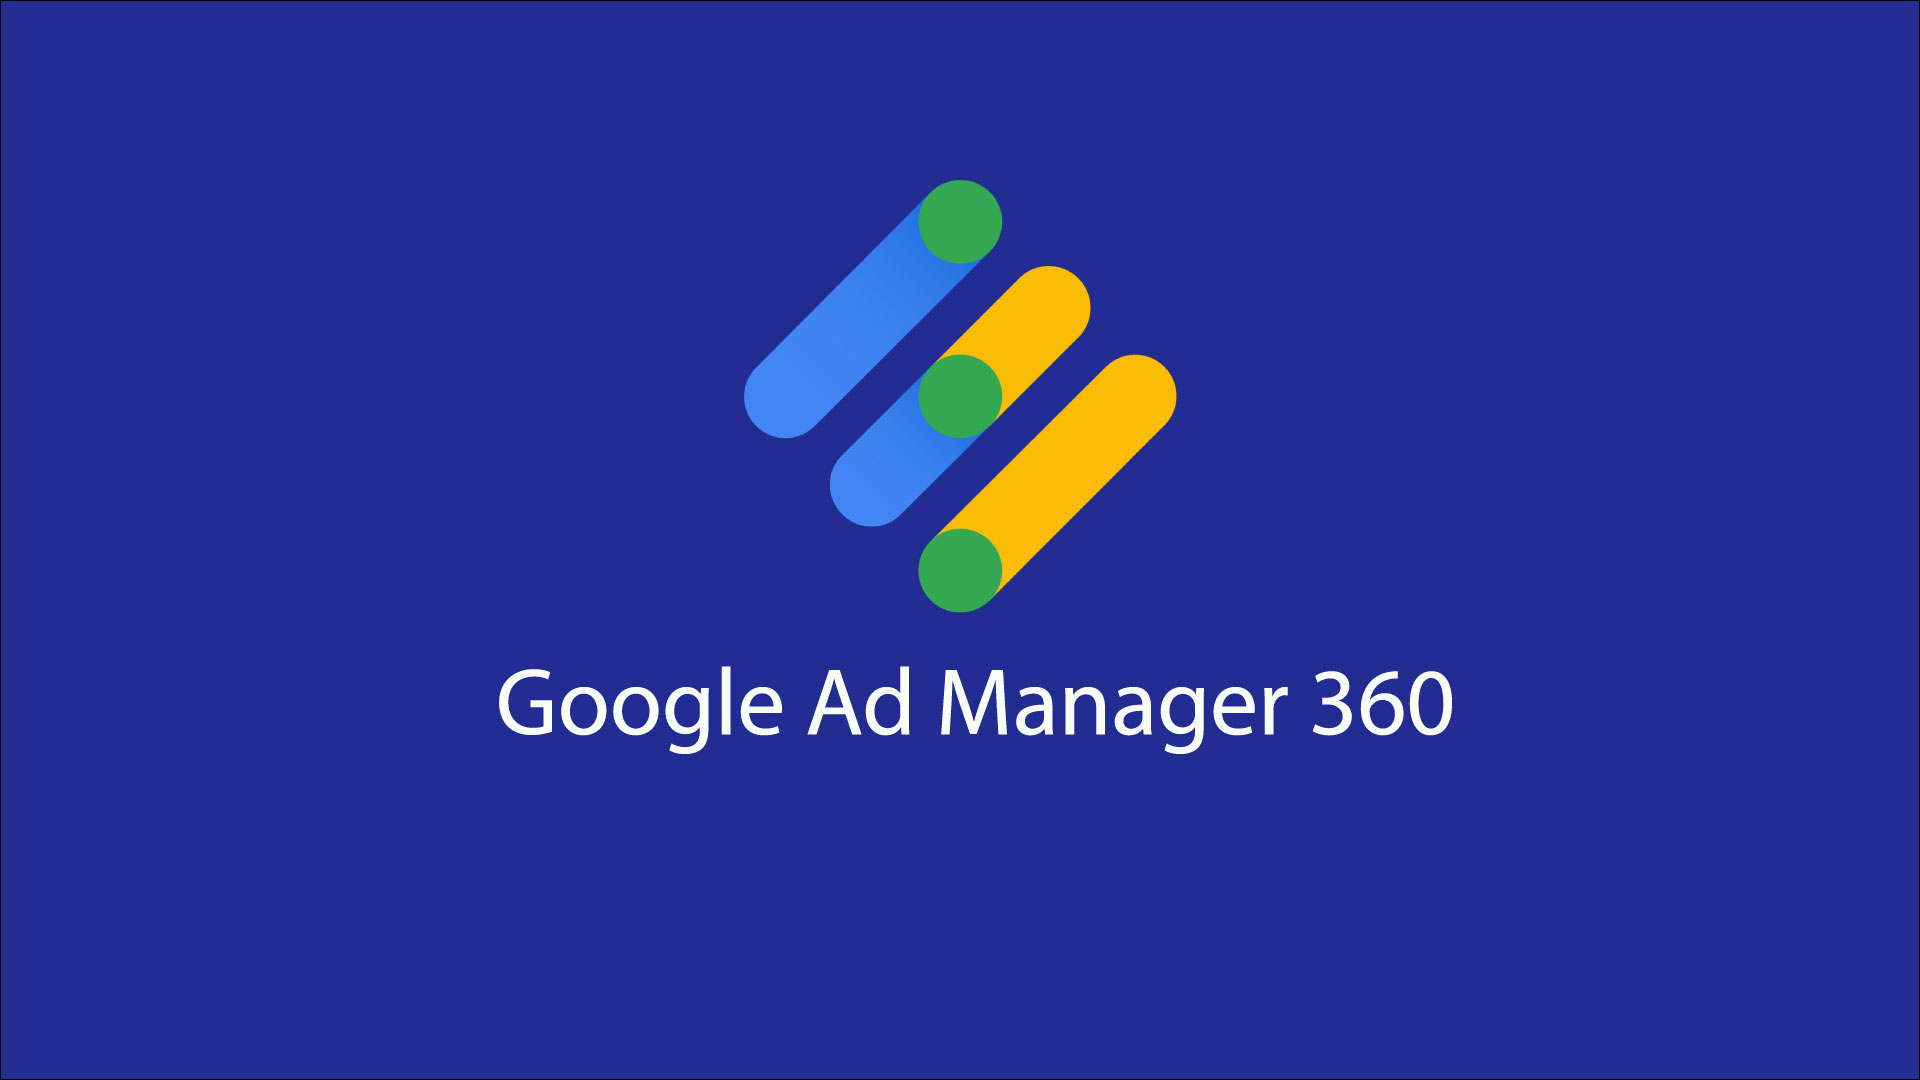 What is Google Ad Manager 360?